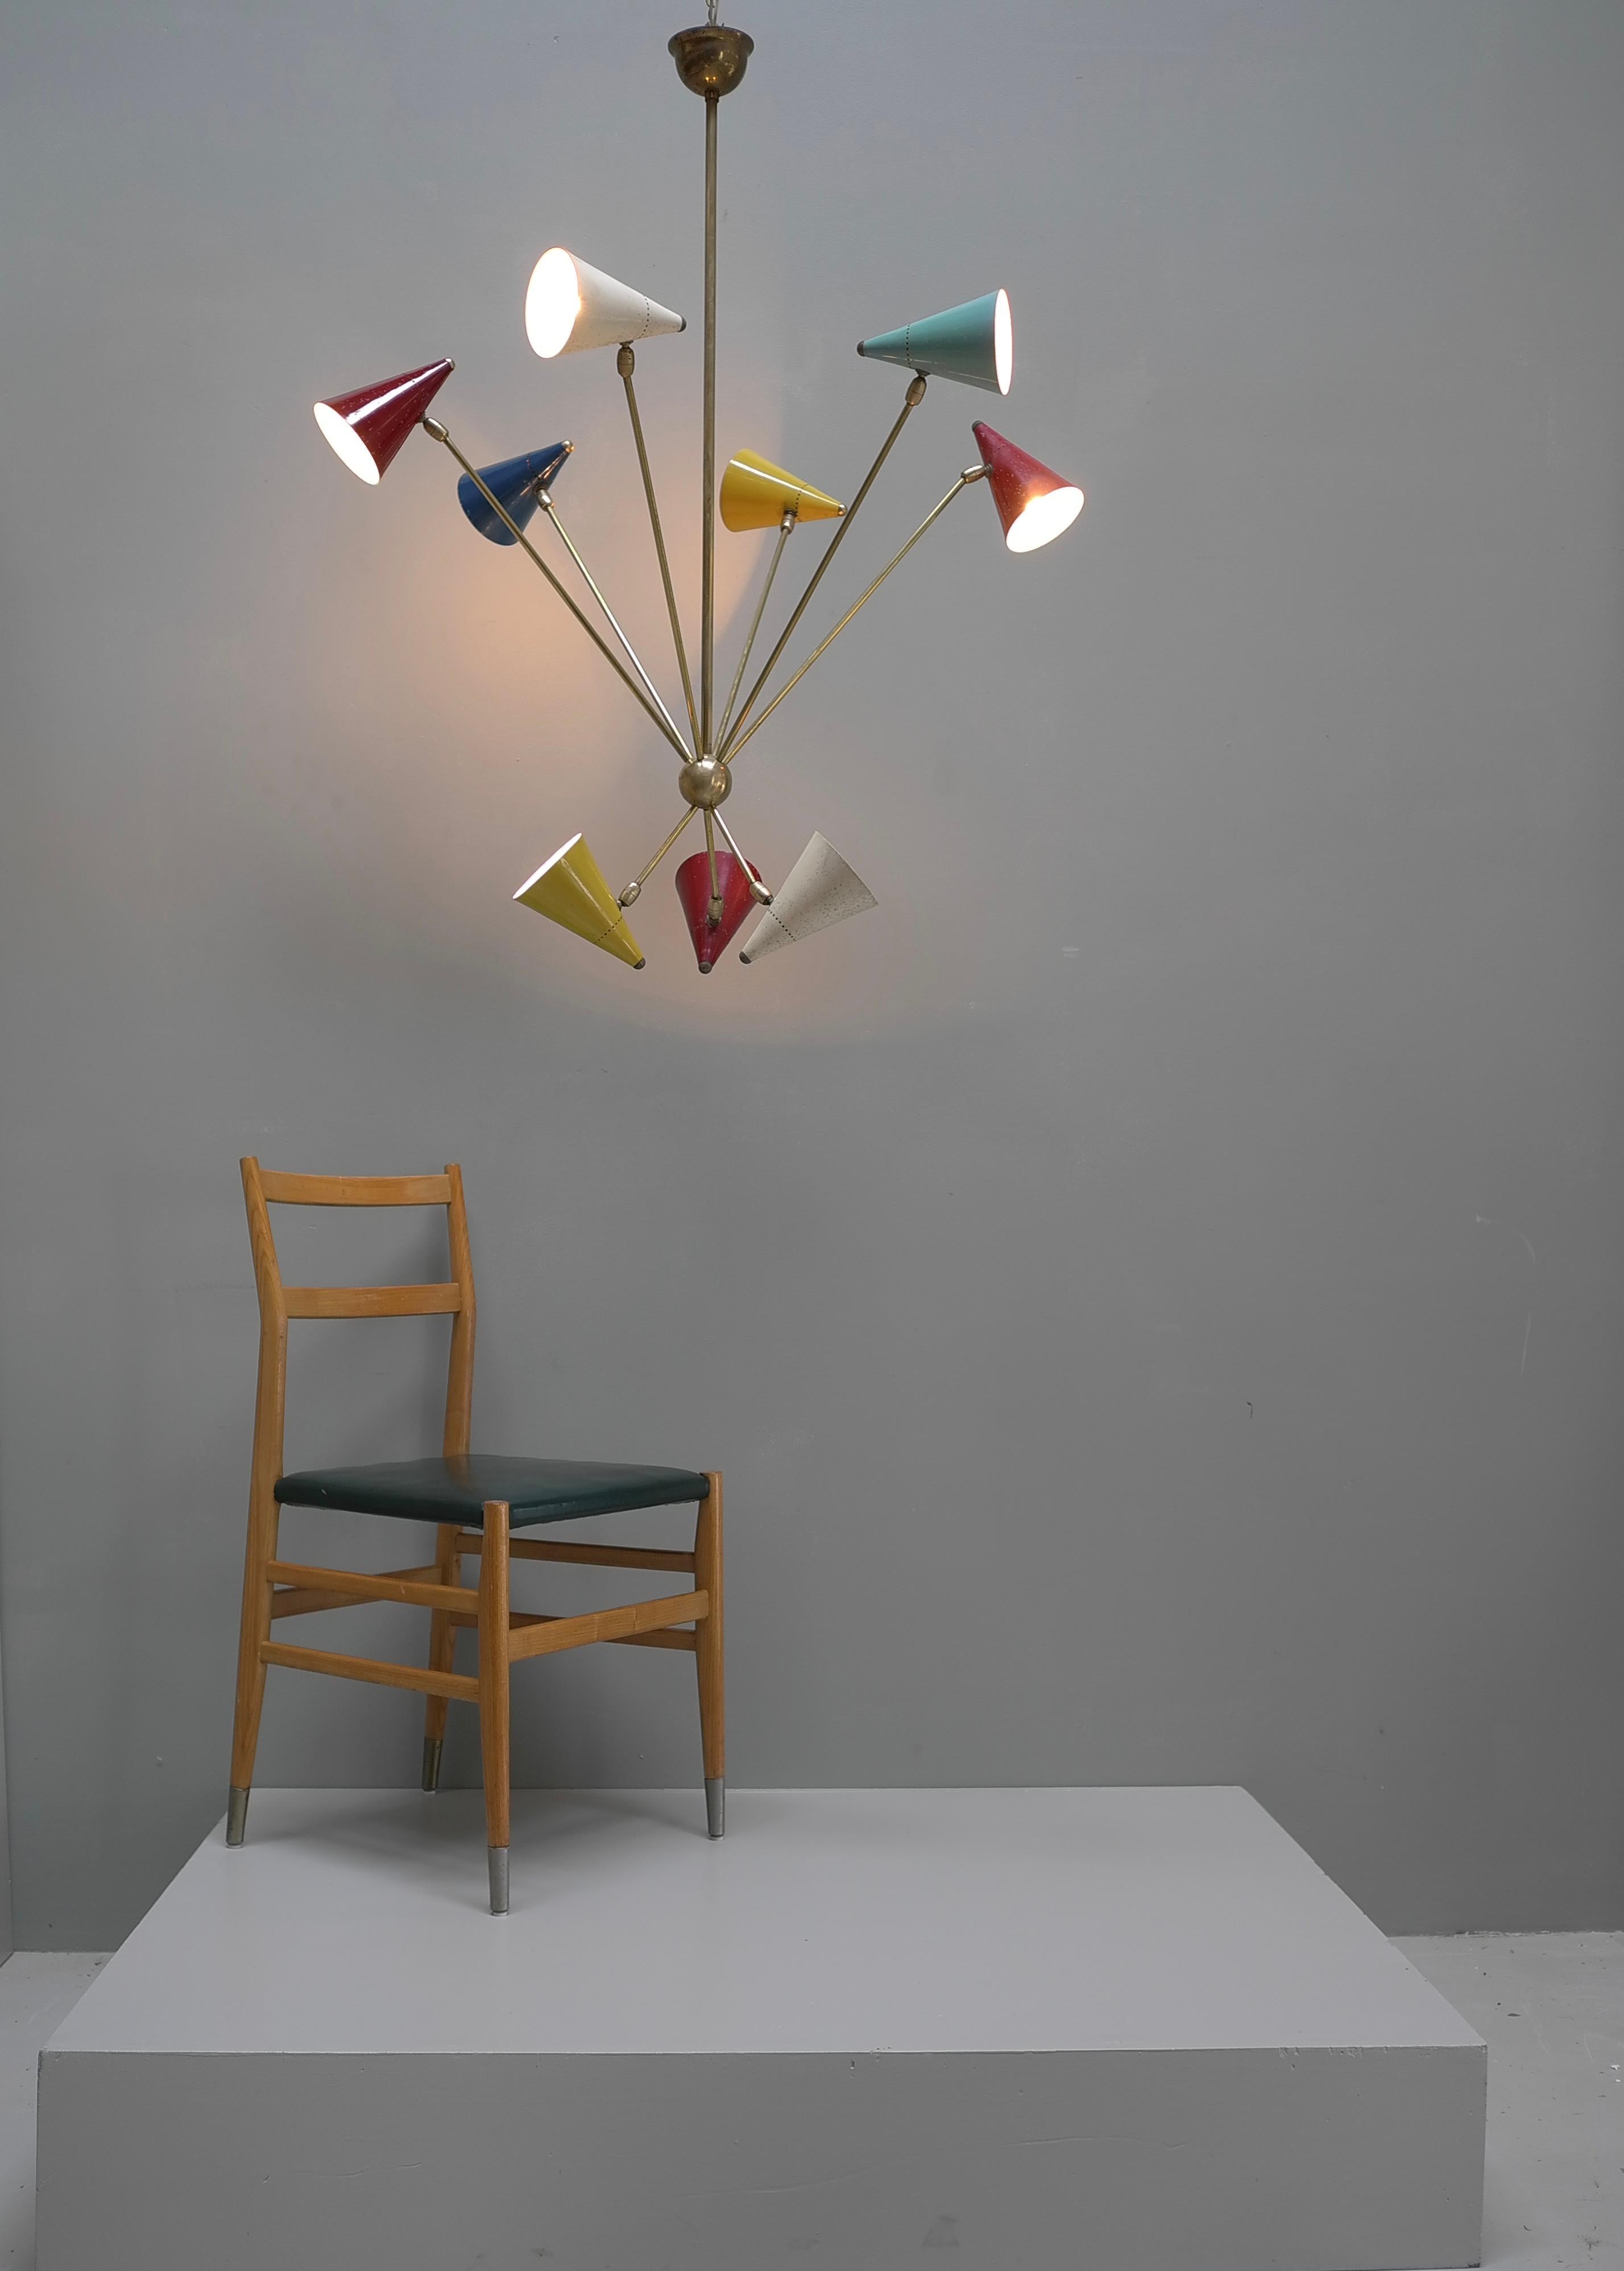 Rare Lare Multicolored Gilardi & Barzaghi Pendant lamp, Italy 1960's

All Shades swivels at two points and can be rotated from side to side and be moved up or down. A real eye-catcher in any interior.

